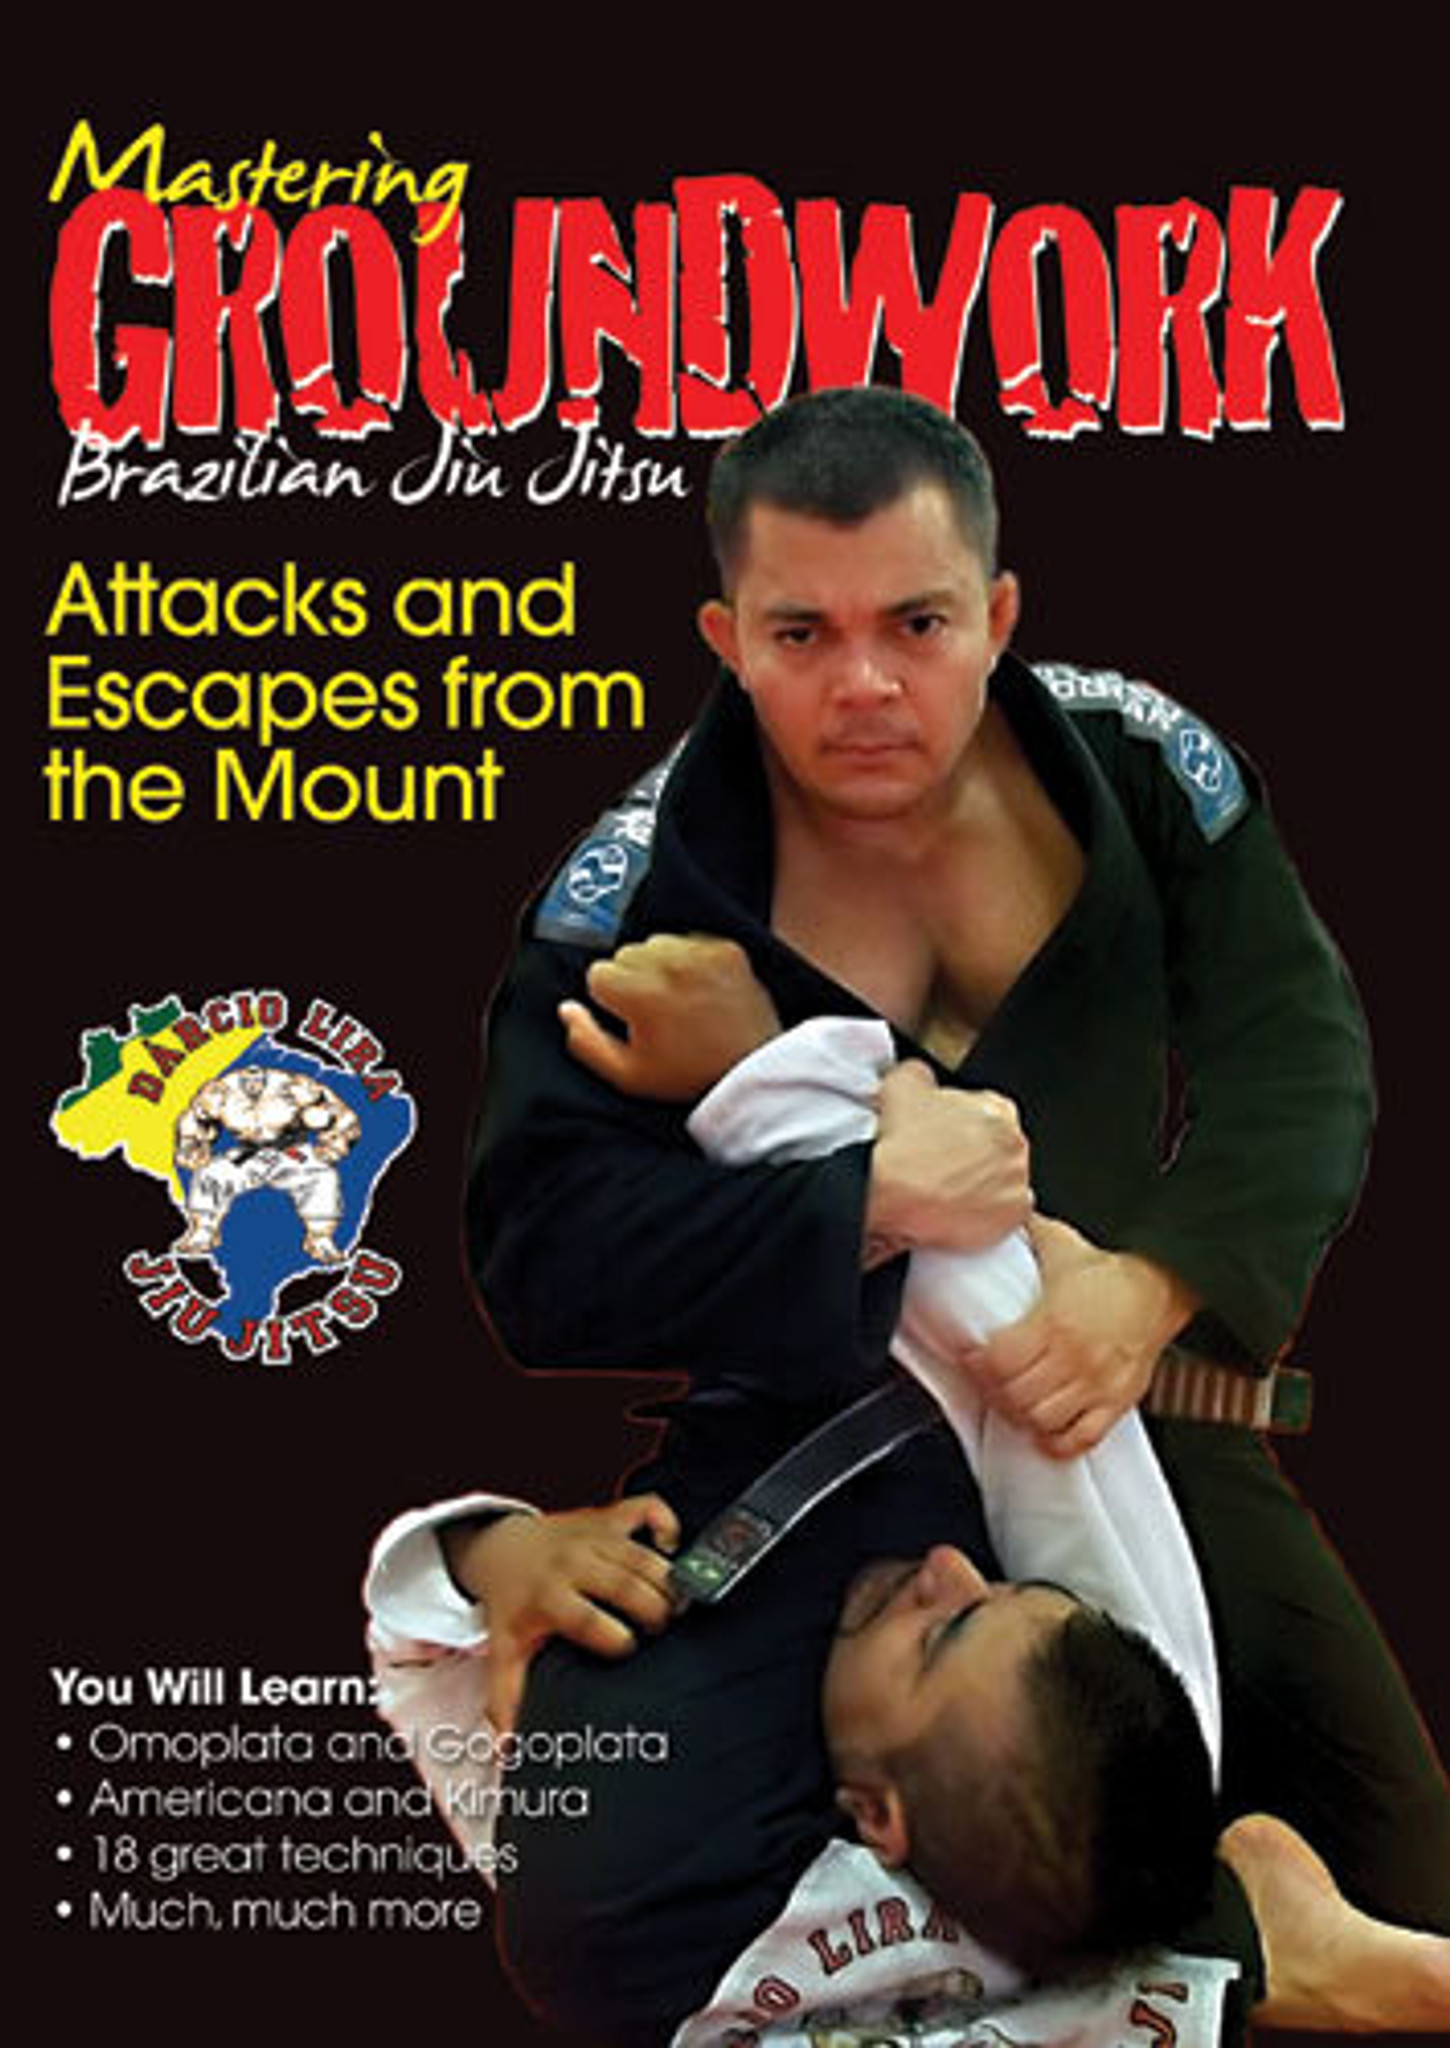 Mastering Groundwork #5 Attack and Escapes from the Mount